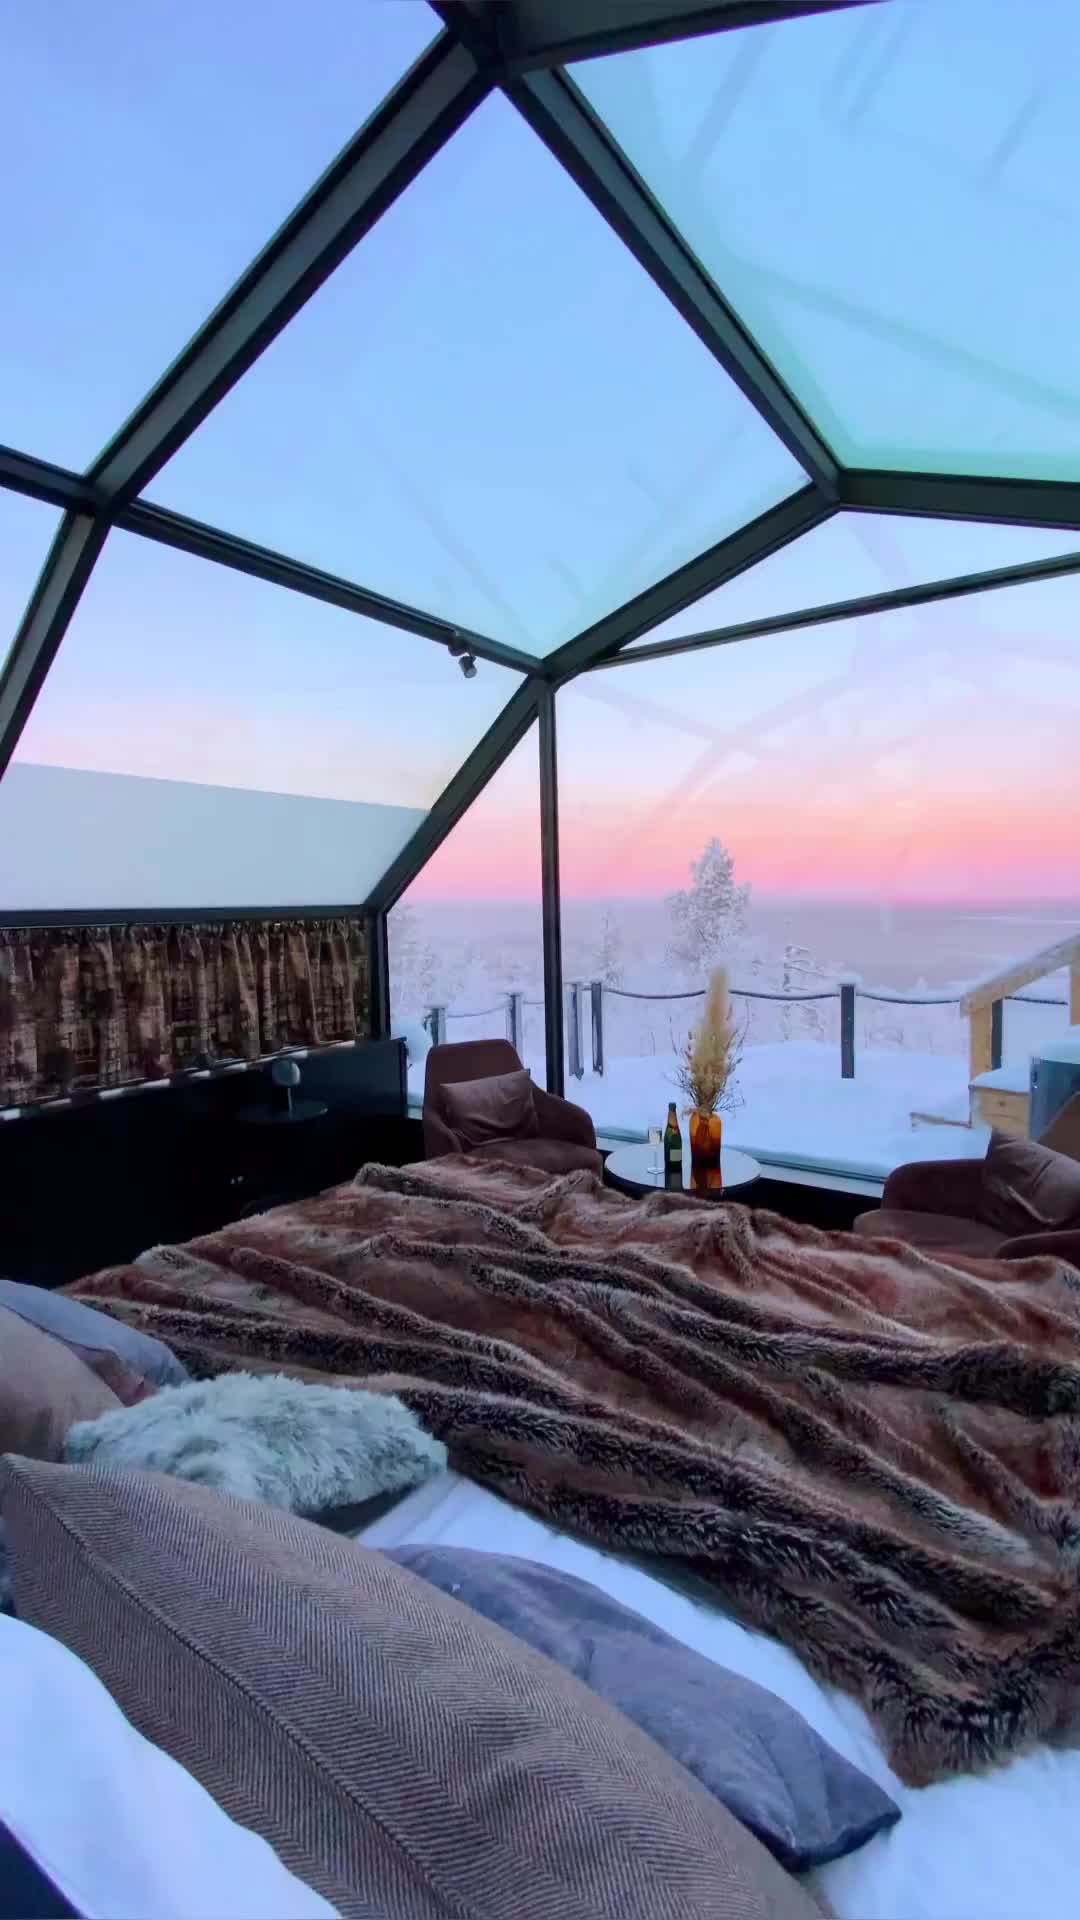 Experience Northern Lights in a Glass Igloo in Finland